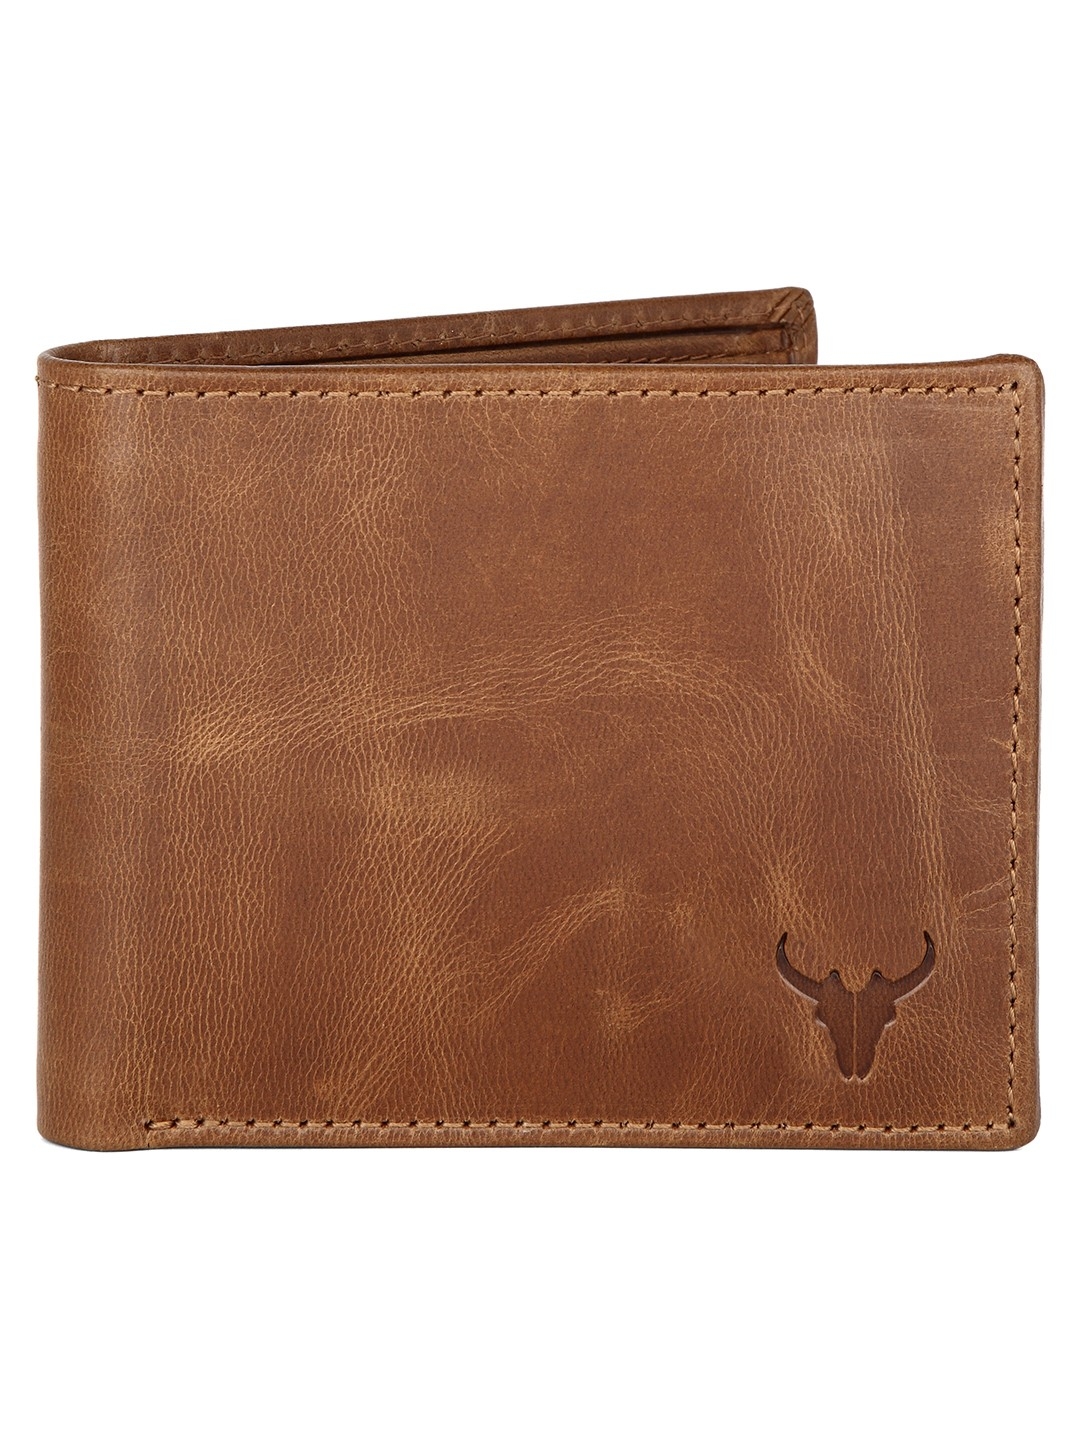 Napa Hide | Napa Hide RFID Protected Genuine High Quality Tan Leather Wallet For Men